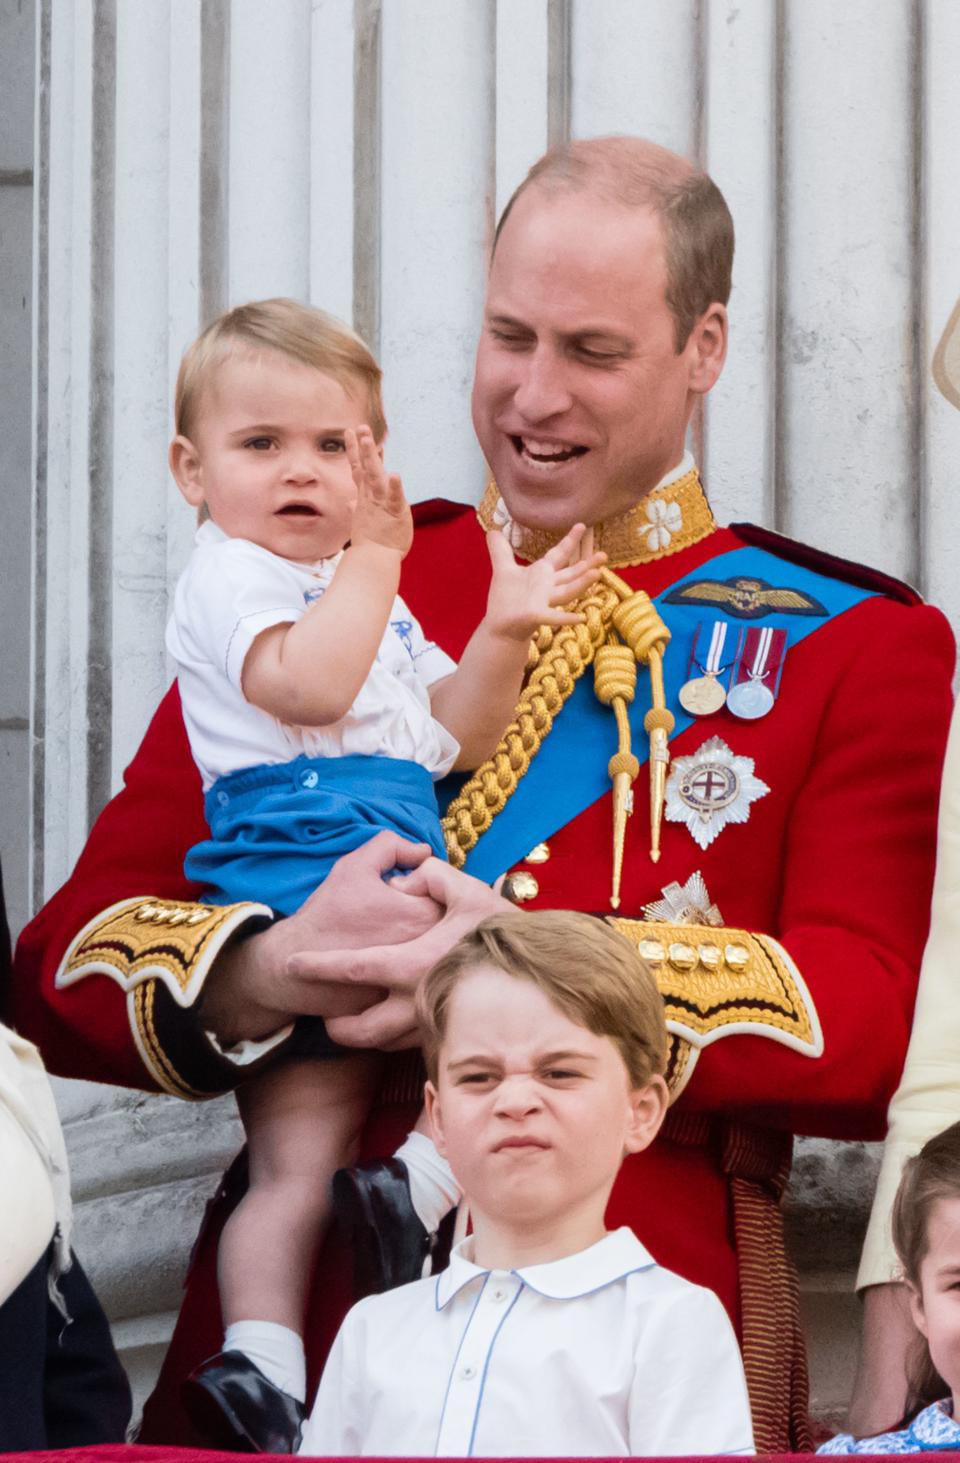 The British Royal Family Celebrates Father's Day with a Series of Adorable Photos